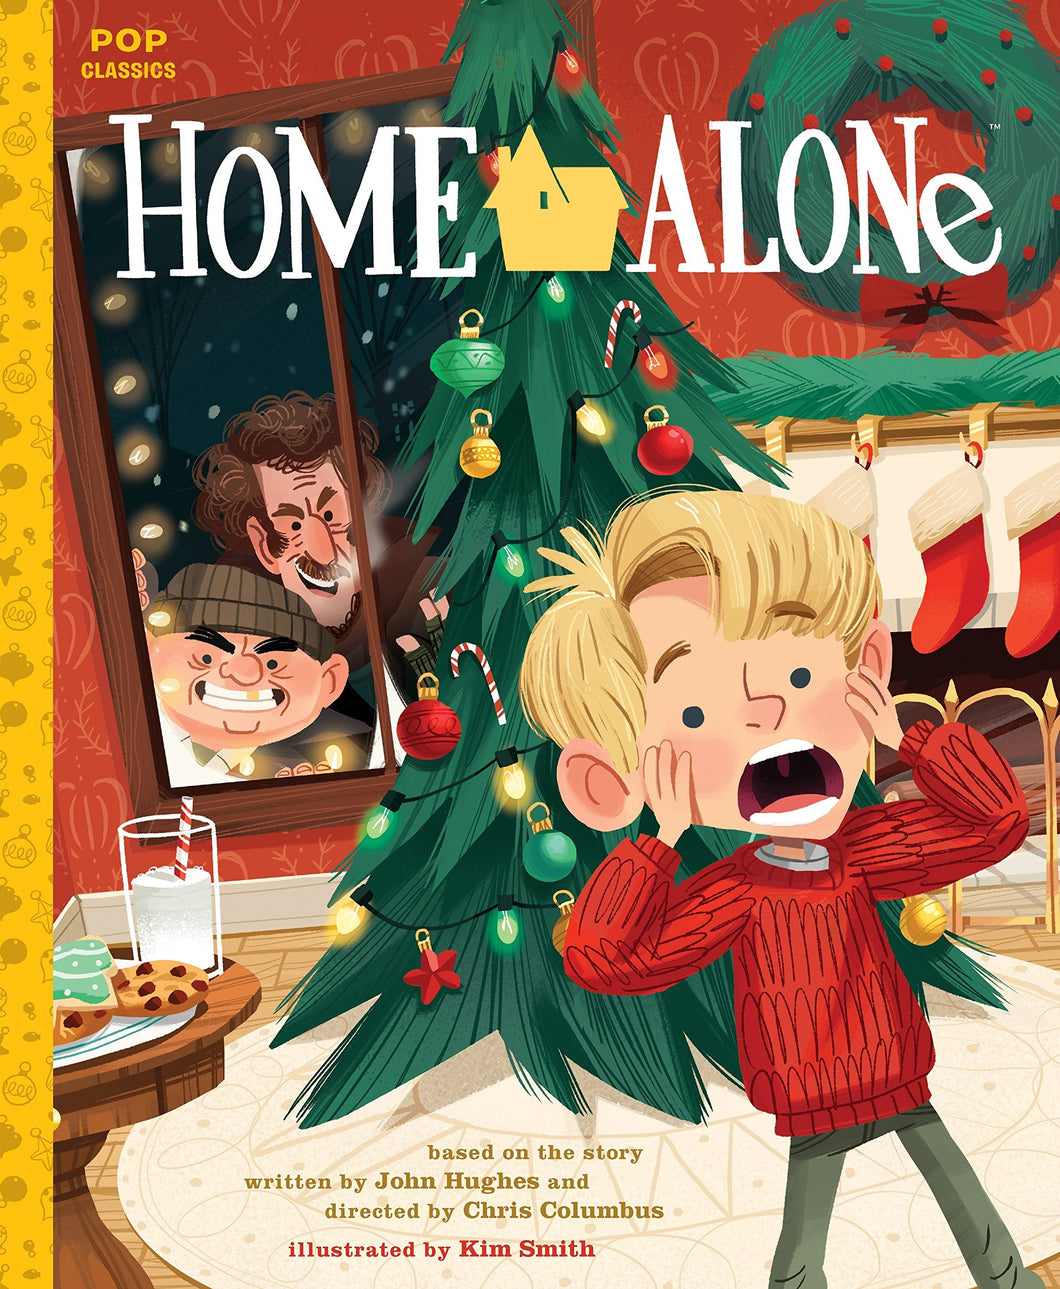 Home Alone: The Classic Illustrated Storybook (Pop Classics)